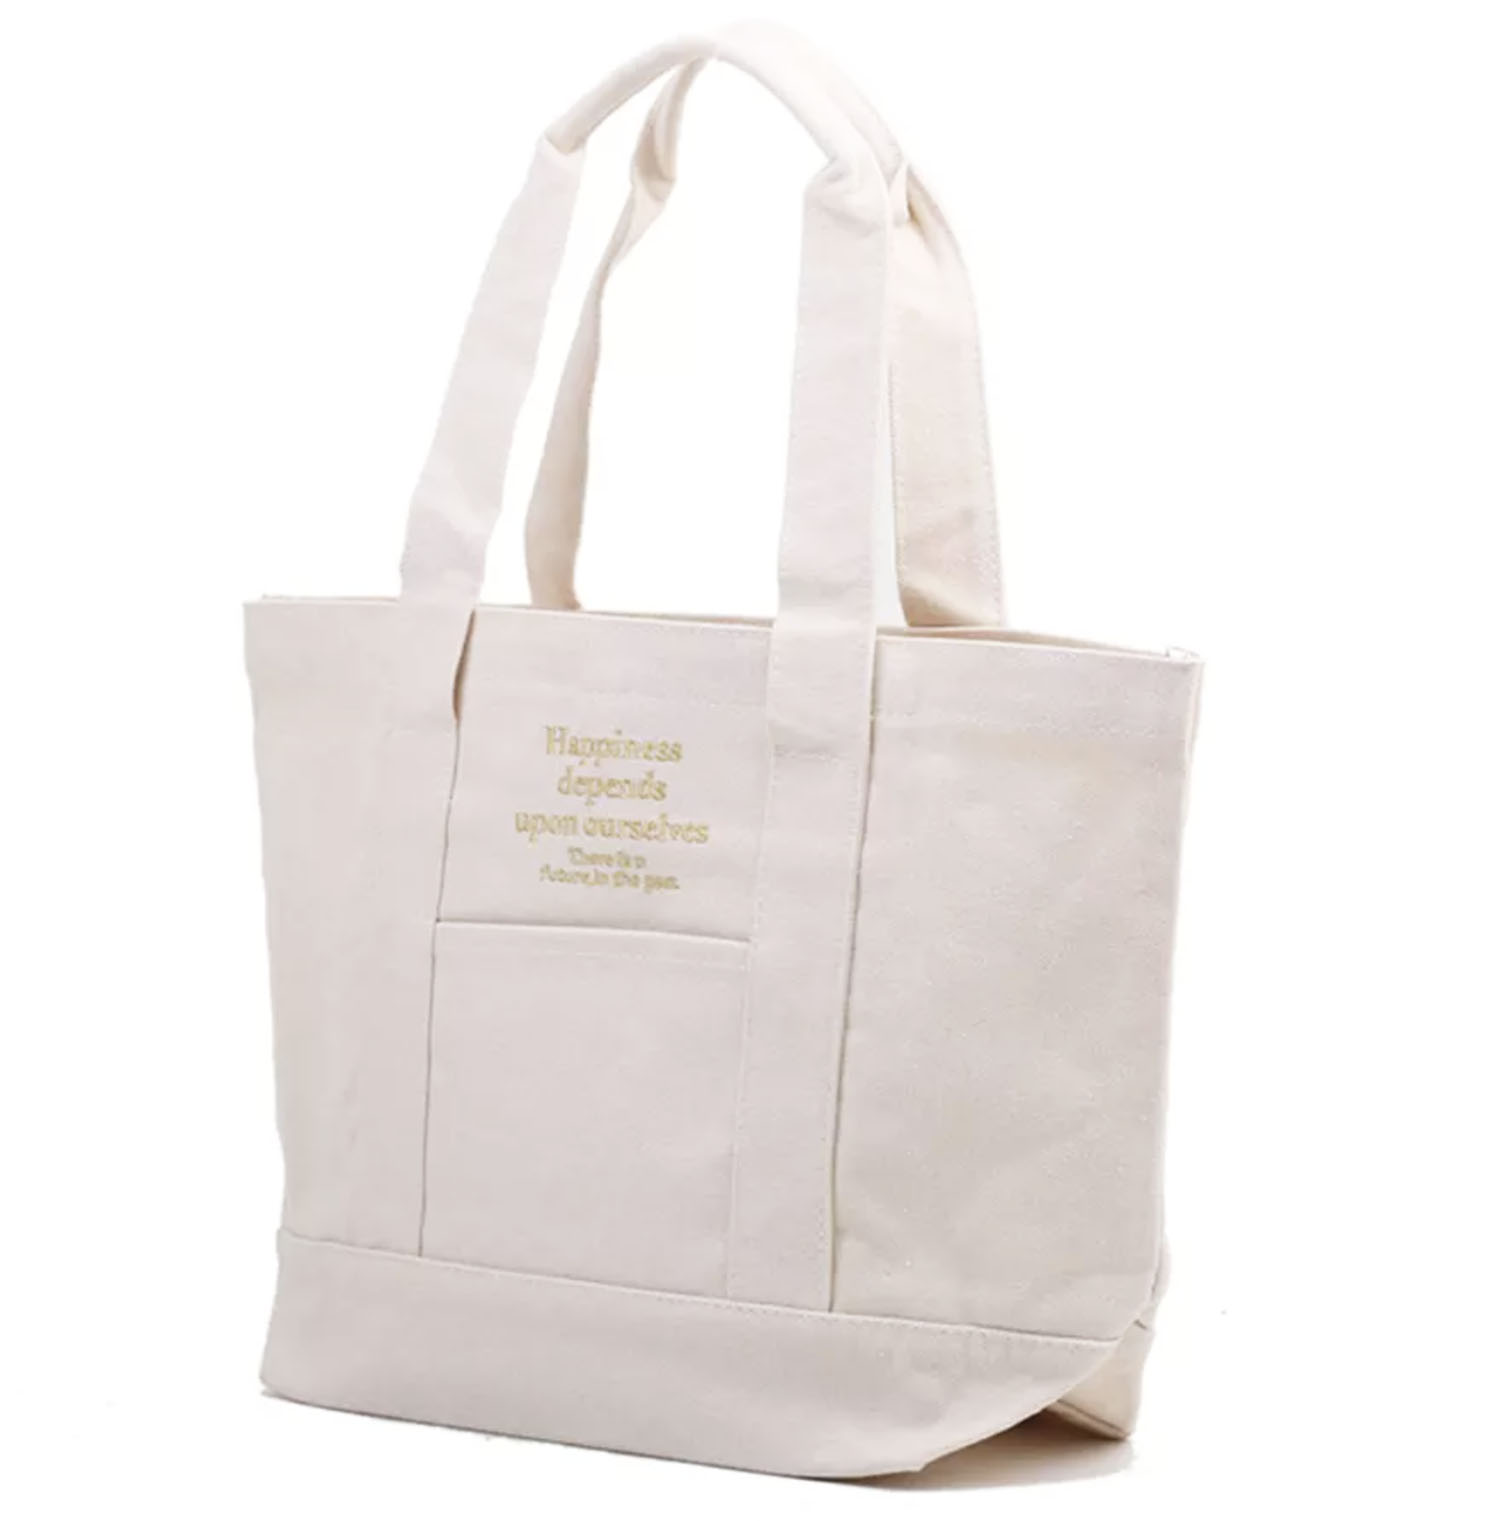 Custom Color Canvas Shopping Bag Made in Thailand - PRESTIGE CREATIONS  FACTORY